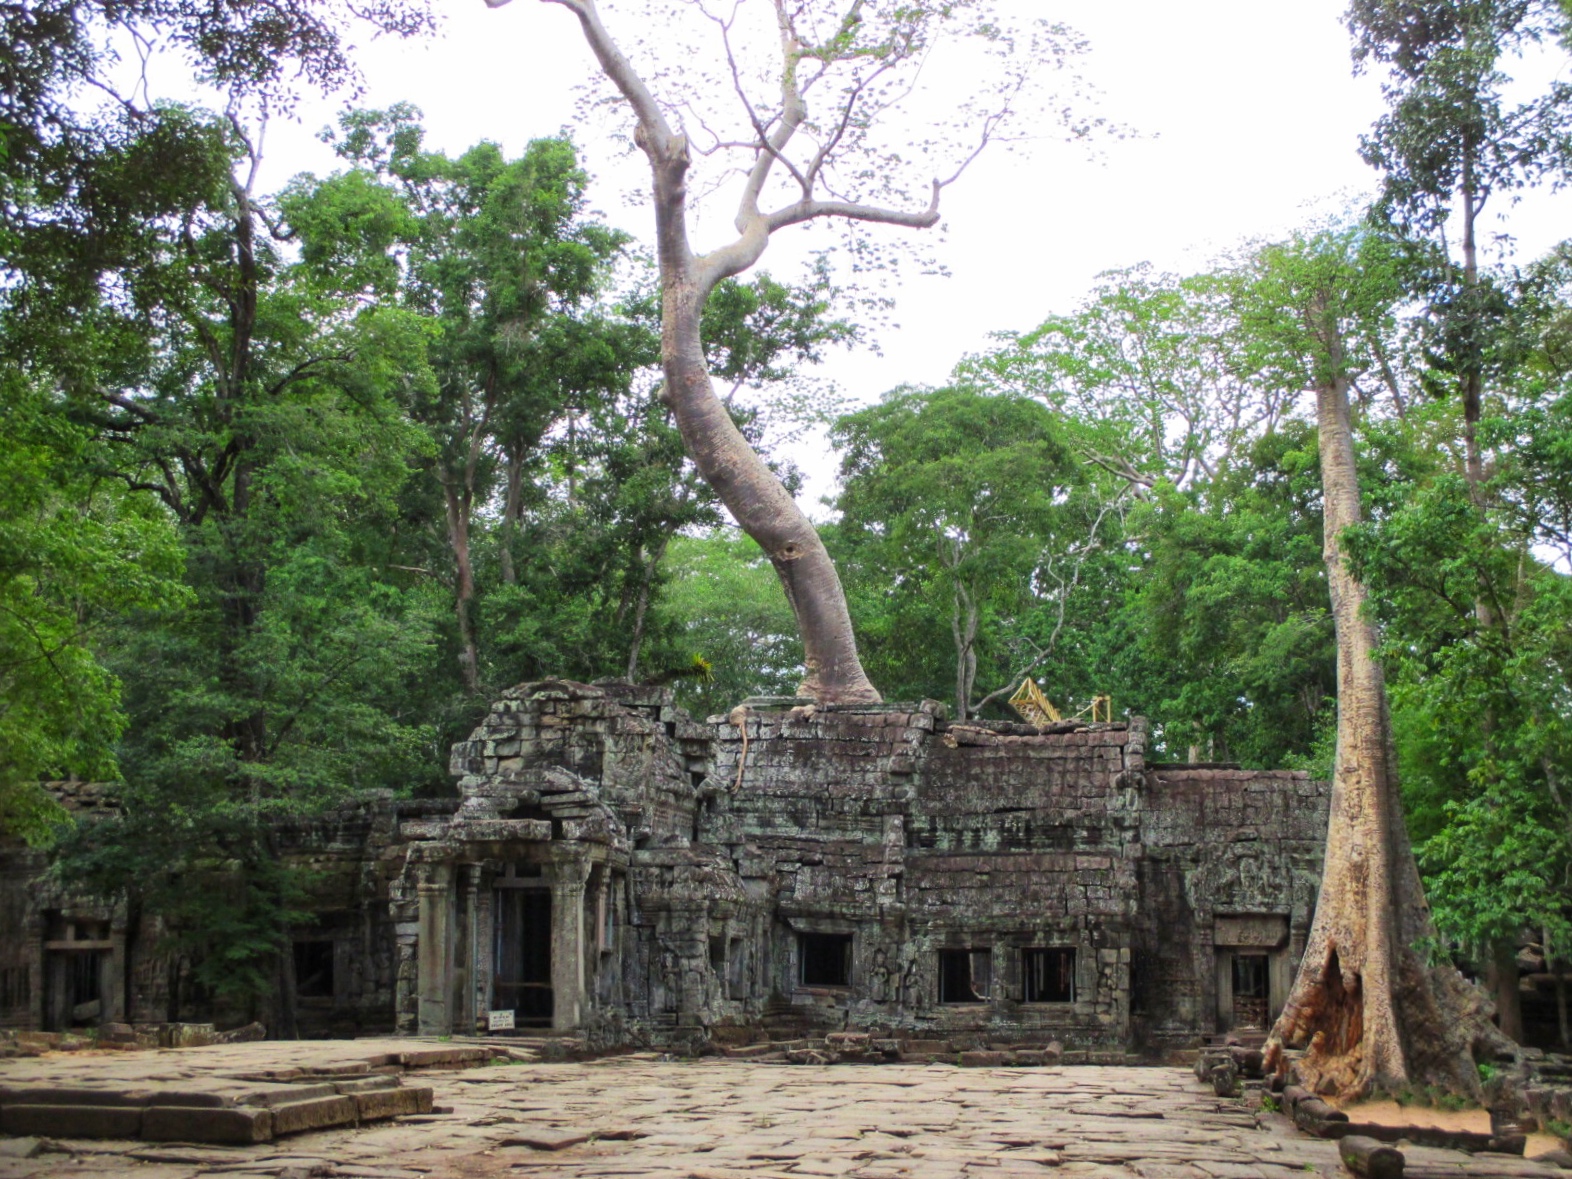 The front view of Ta Prohm from outside the main entrance in Siem Reap